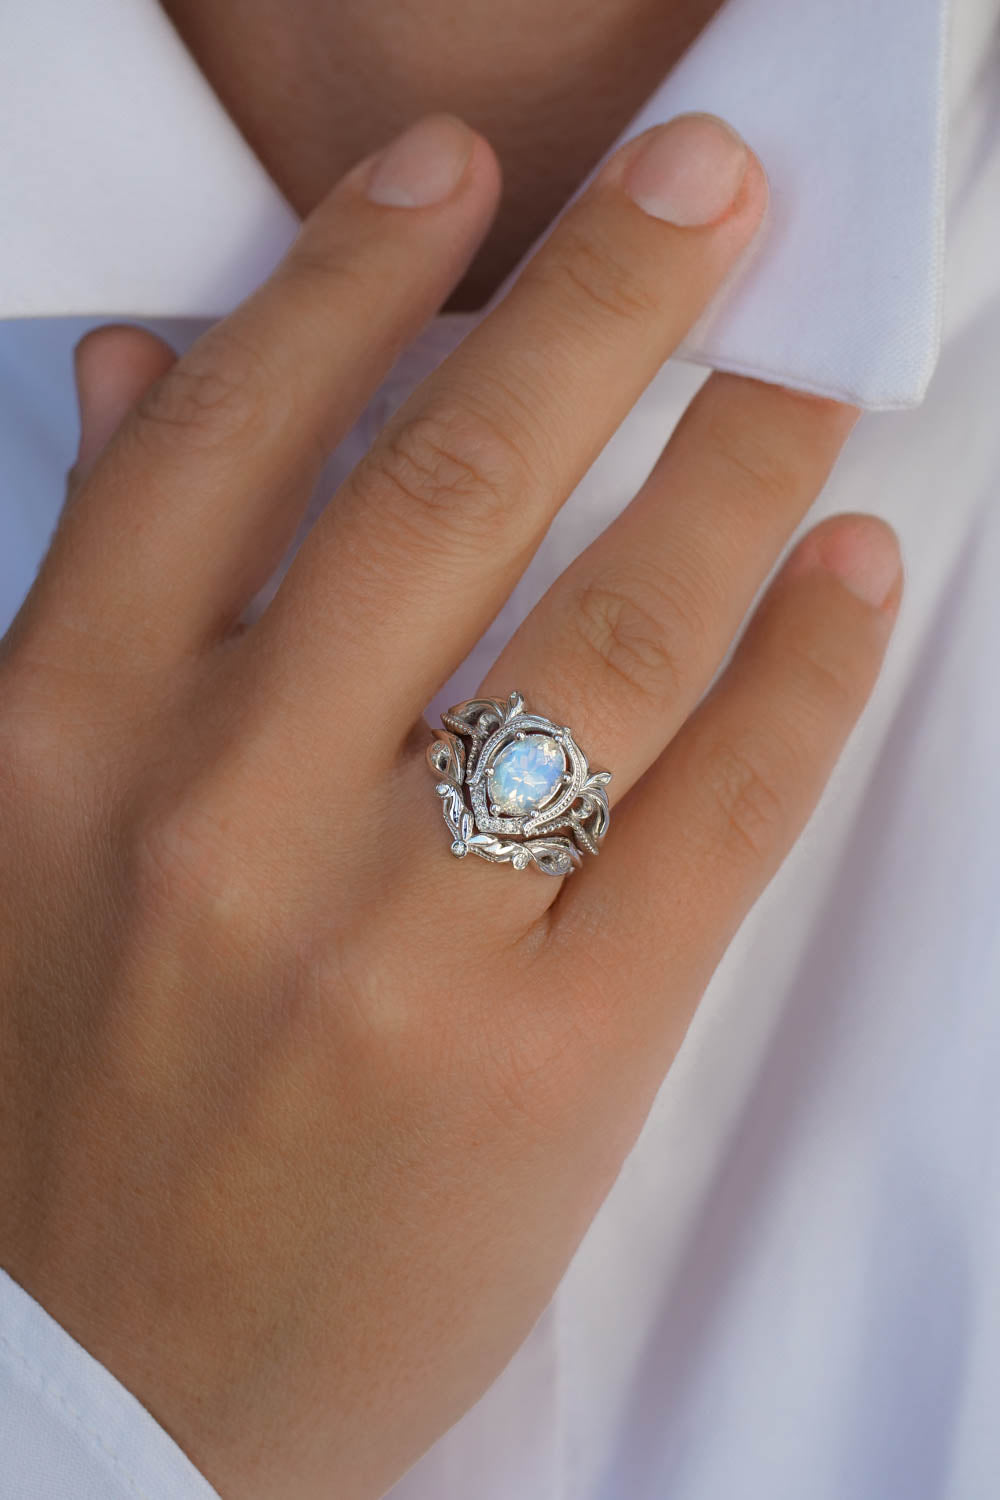 READY TO SHIP: Lida ring set in 14K white gold, oval moonstone 8x6 mm, moissanites, RING SIZE 6 US - Eden Garden Jewelry™